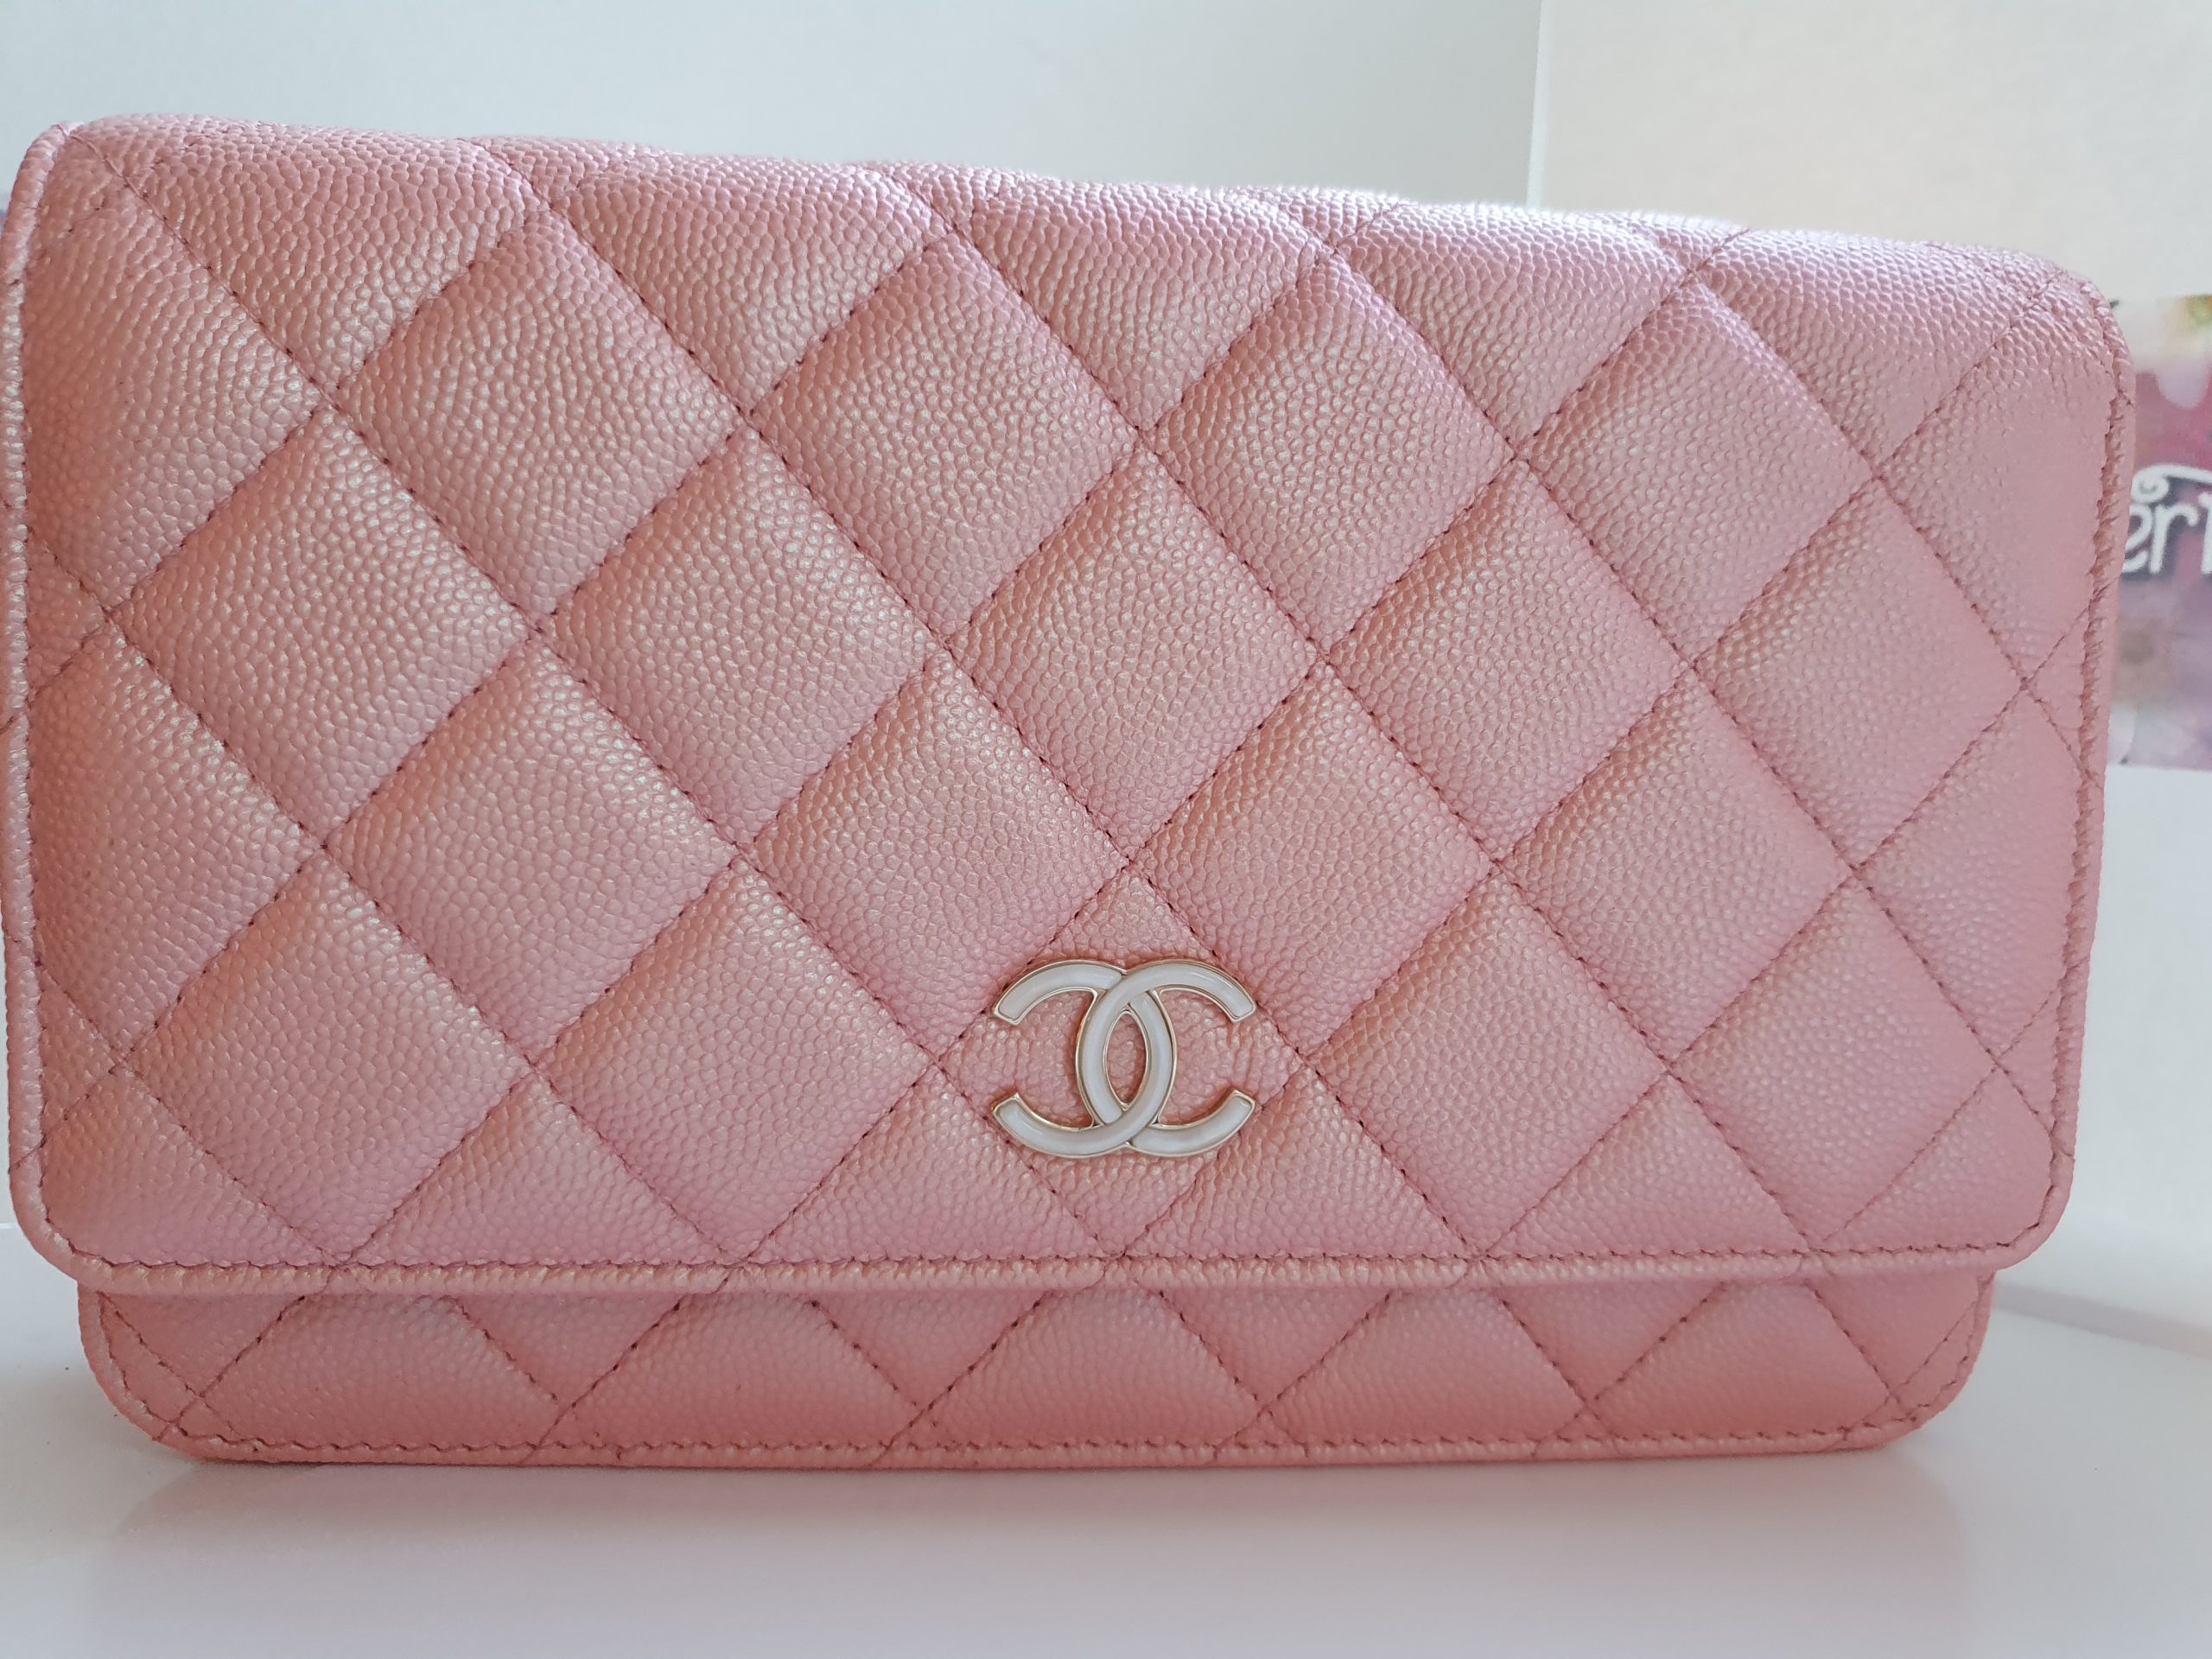 NIB 19S Chanel Iridescent Pearly Pink Classic Wallet on Chain WOC